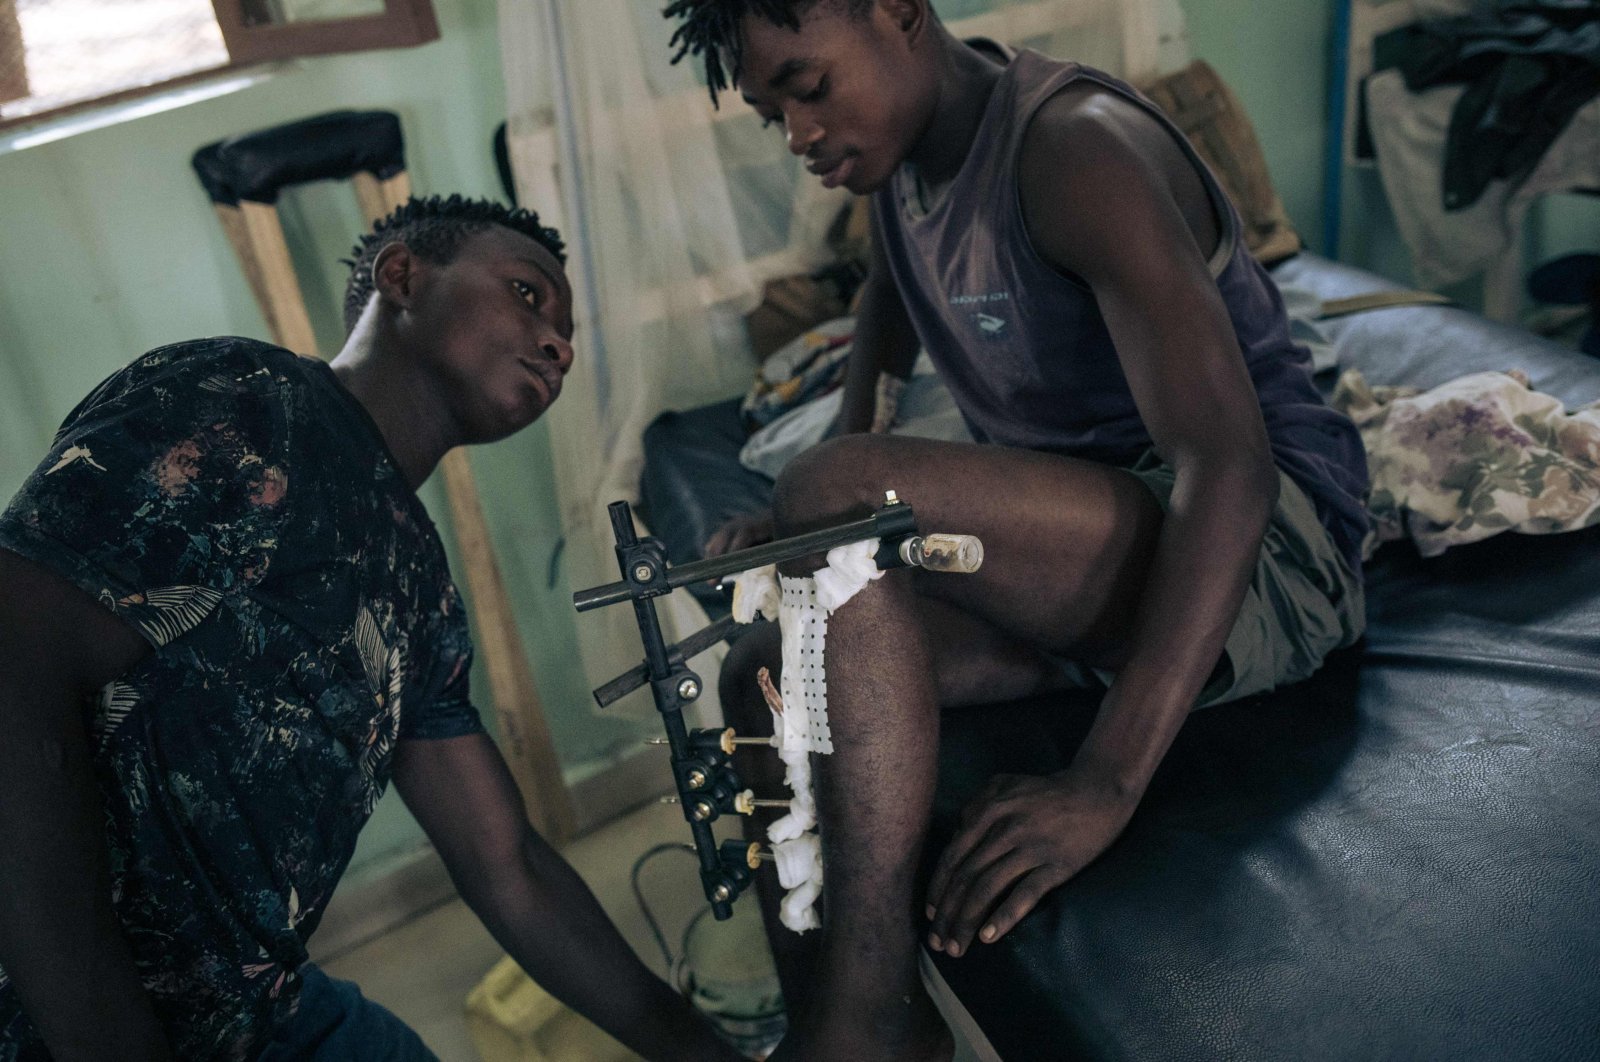 A young man with a gunshot wound on the leg with his attendant at Rutshuru Hospital in the eastern province of North Kivu, Democratic Republic of Congo, July 23, 2022. (Photo by ALEXIS HUGUET / AFP)